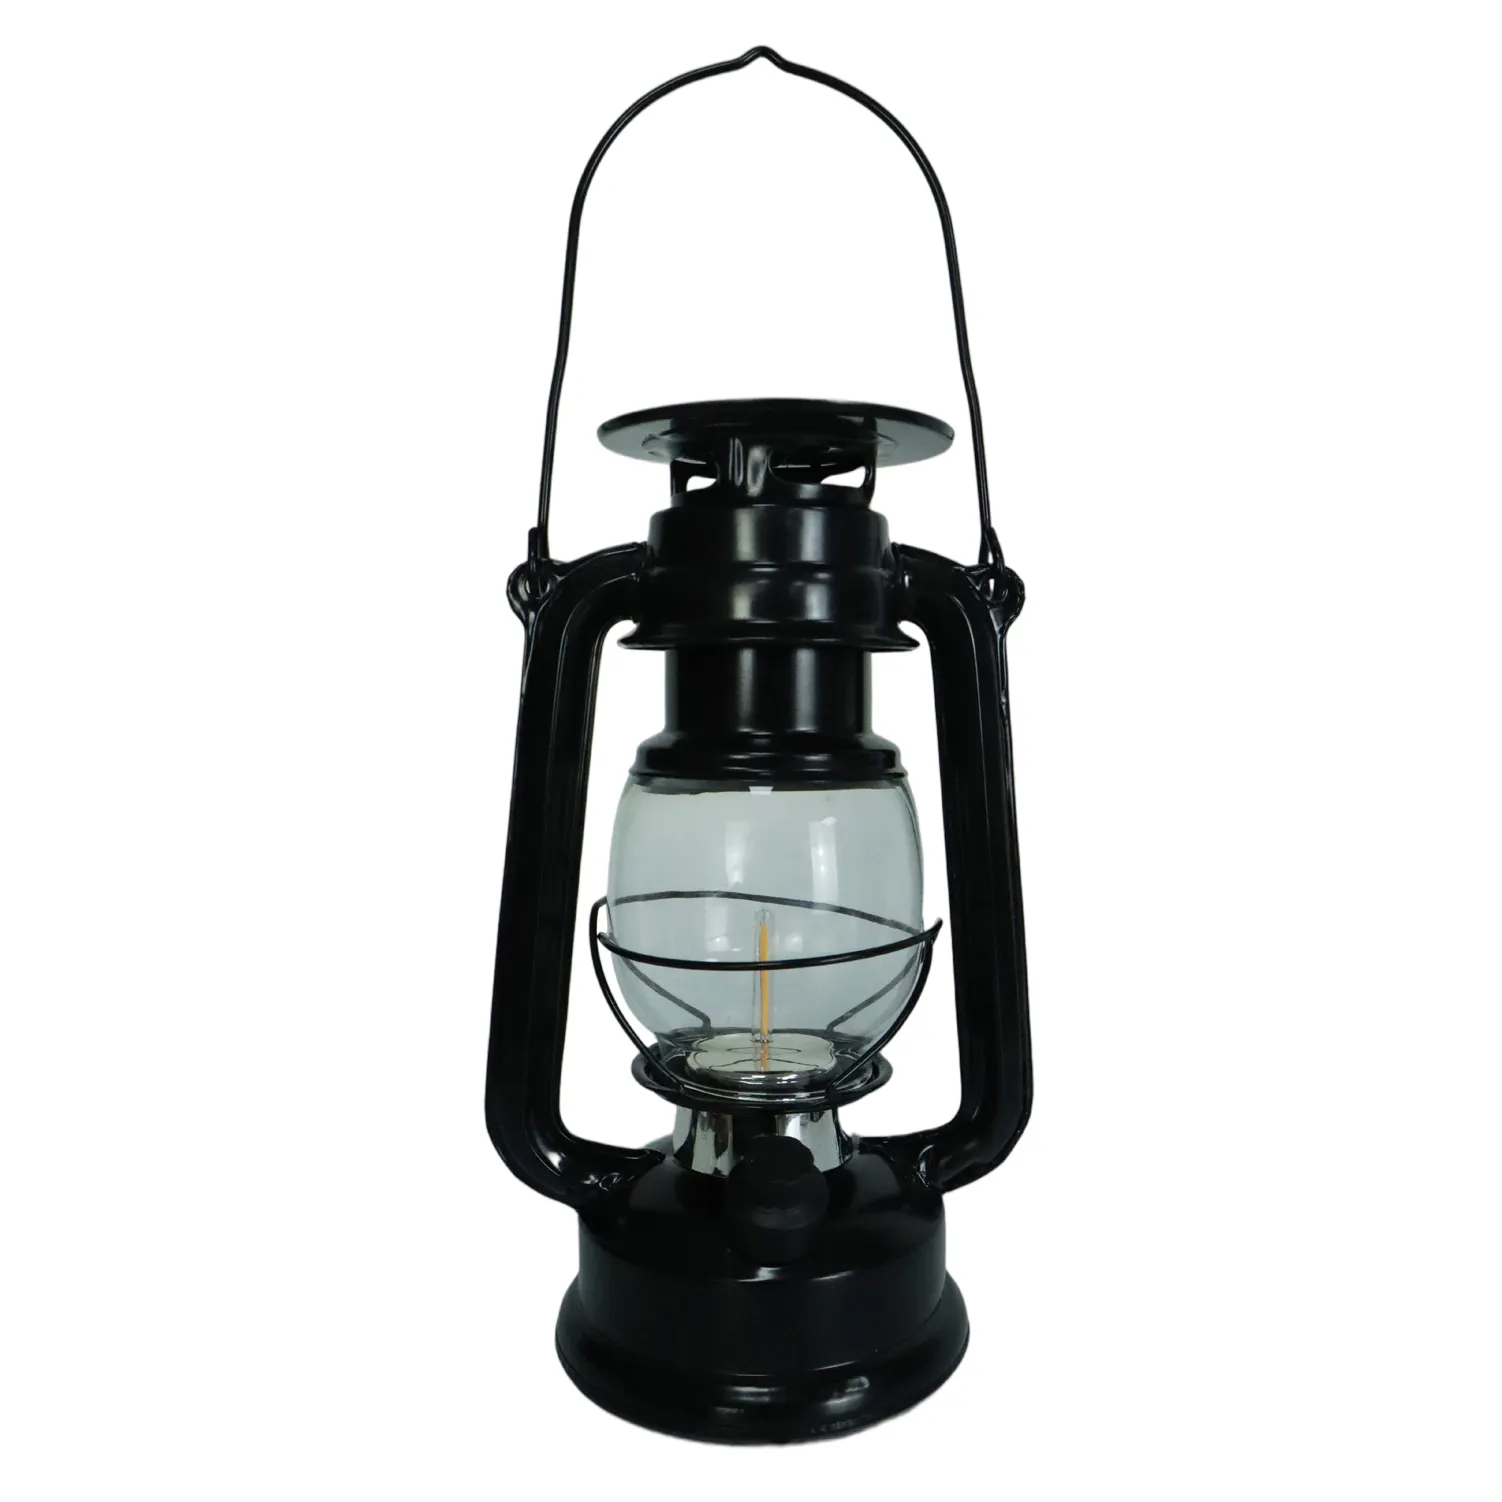 Outdoor Solar Camping Light, Vintage Solar Power Oil Lantern, USB rechargeable Waterproof Camping Lamp